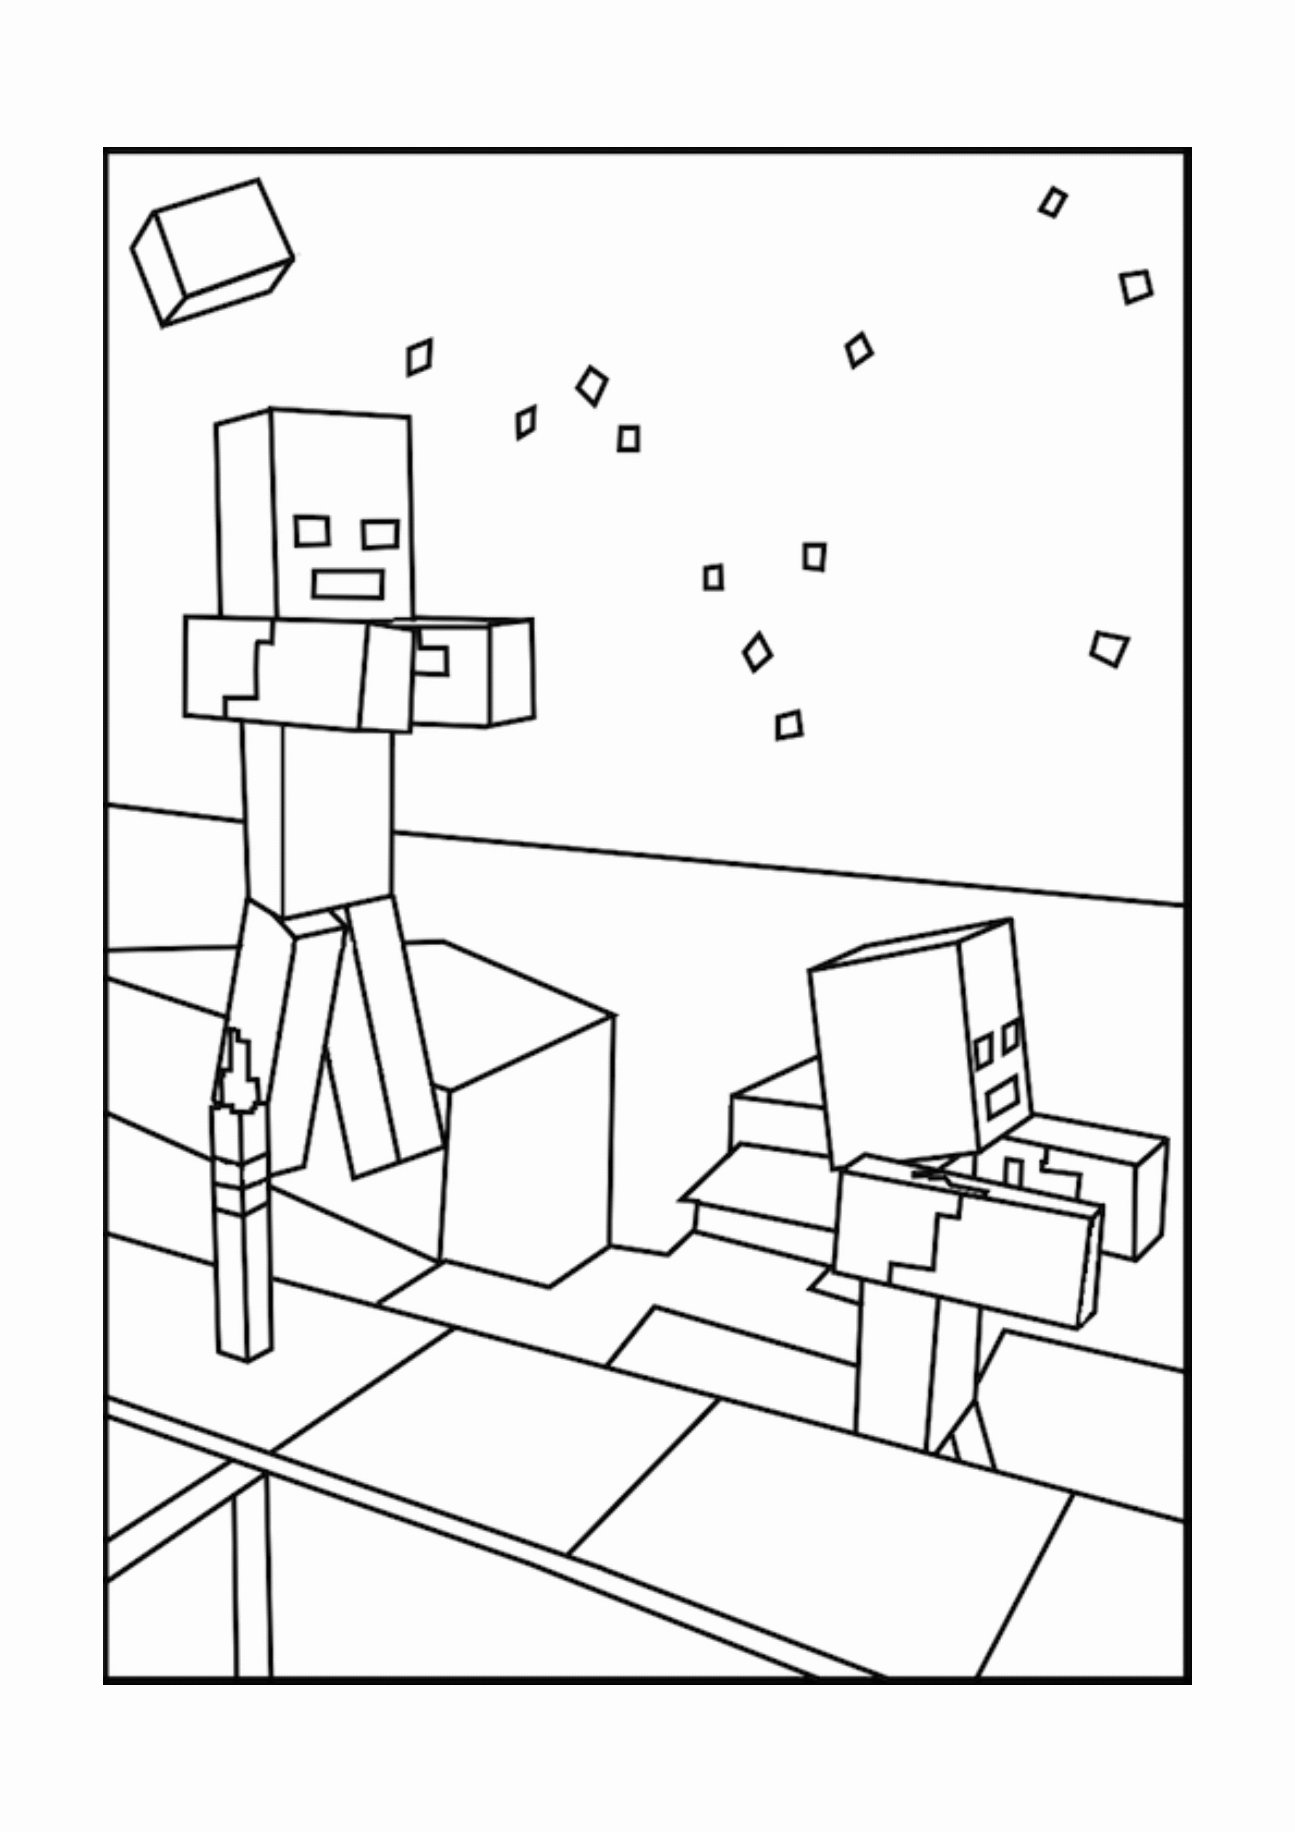 Minecraft Coloring Sheets Printable